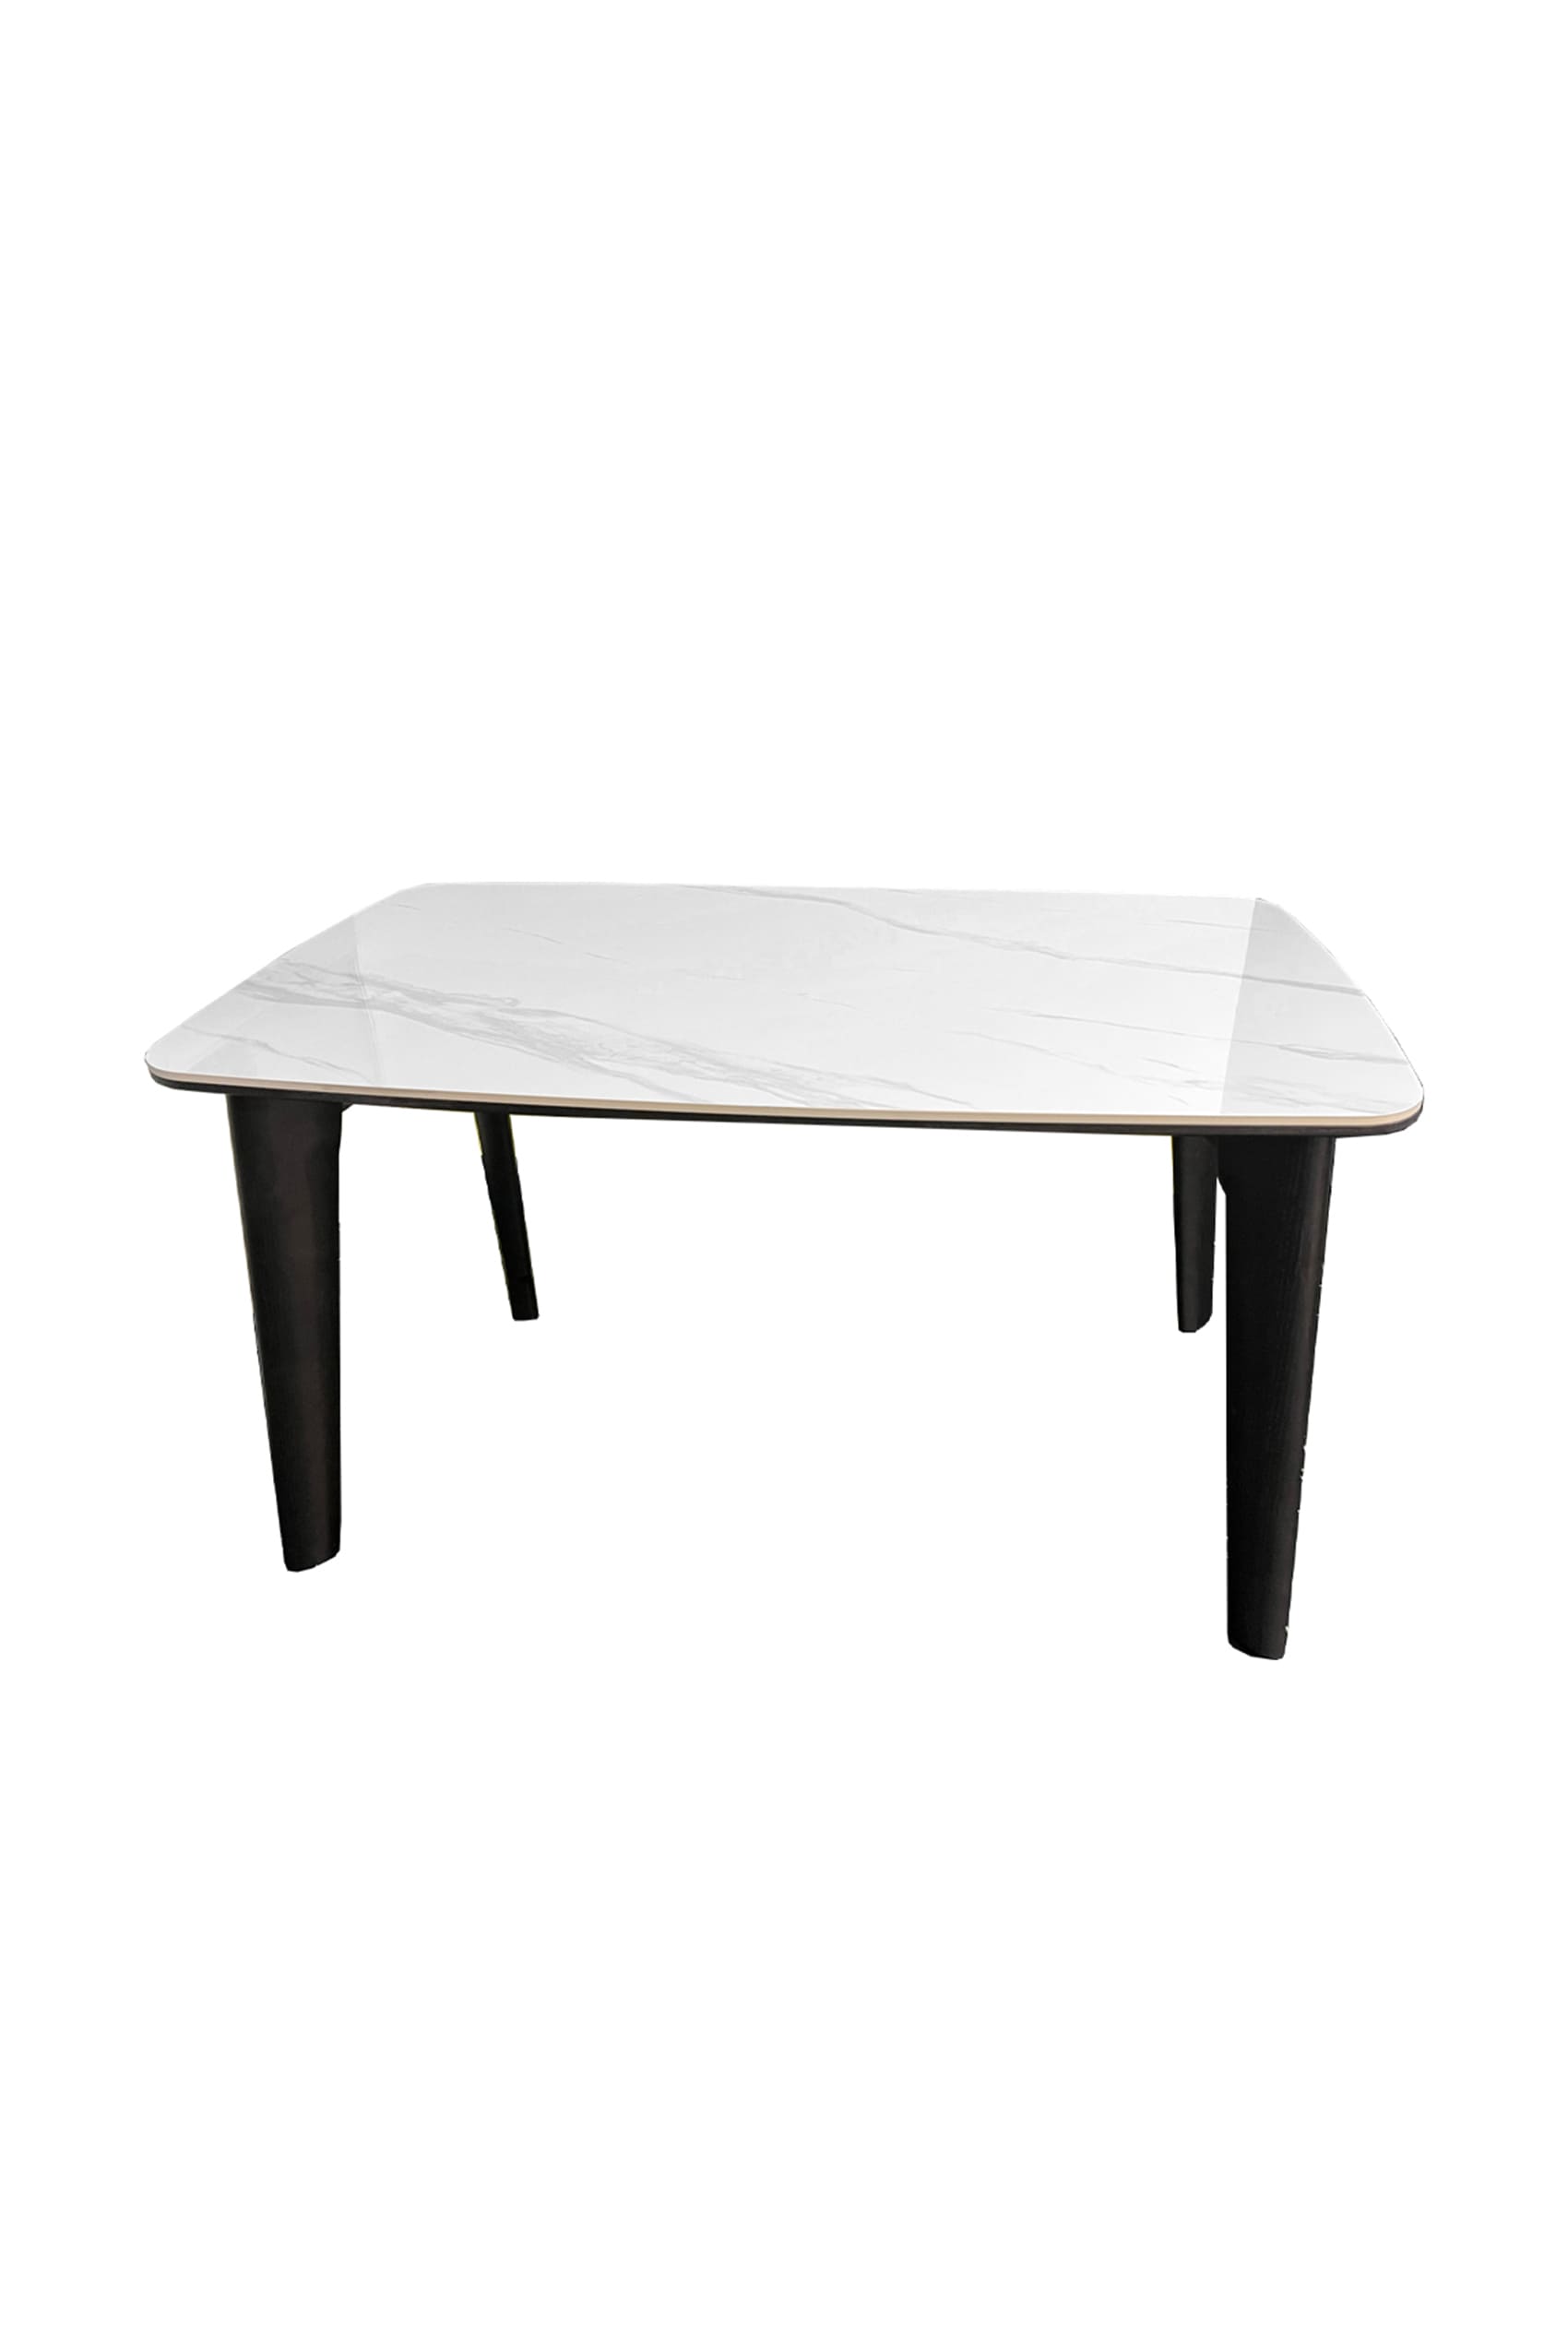 Jerzu Sintered Stone Glossy White Dining Table - TheFurniture.com.sg